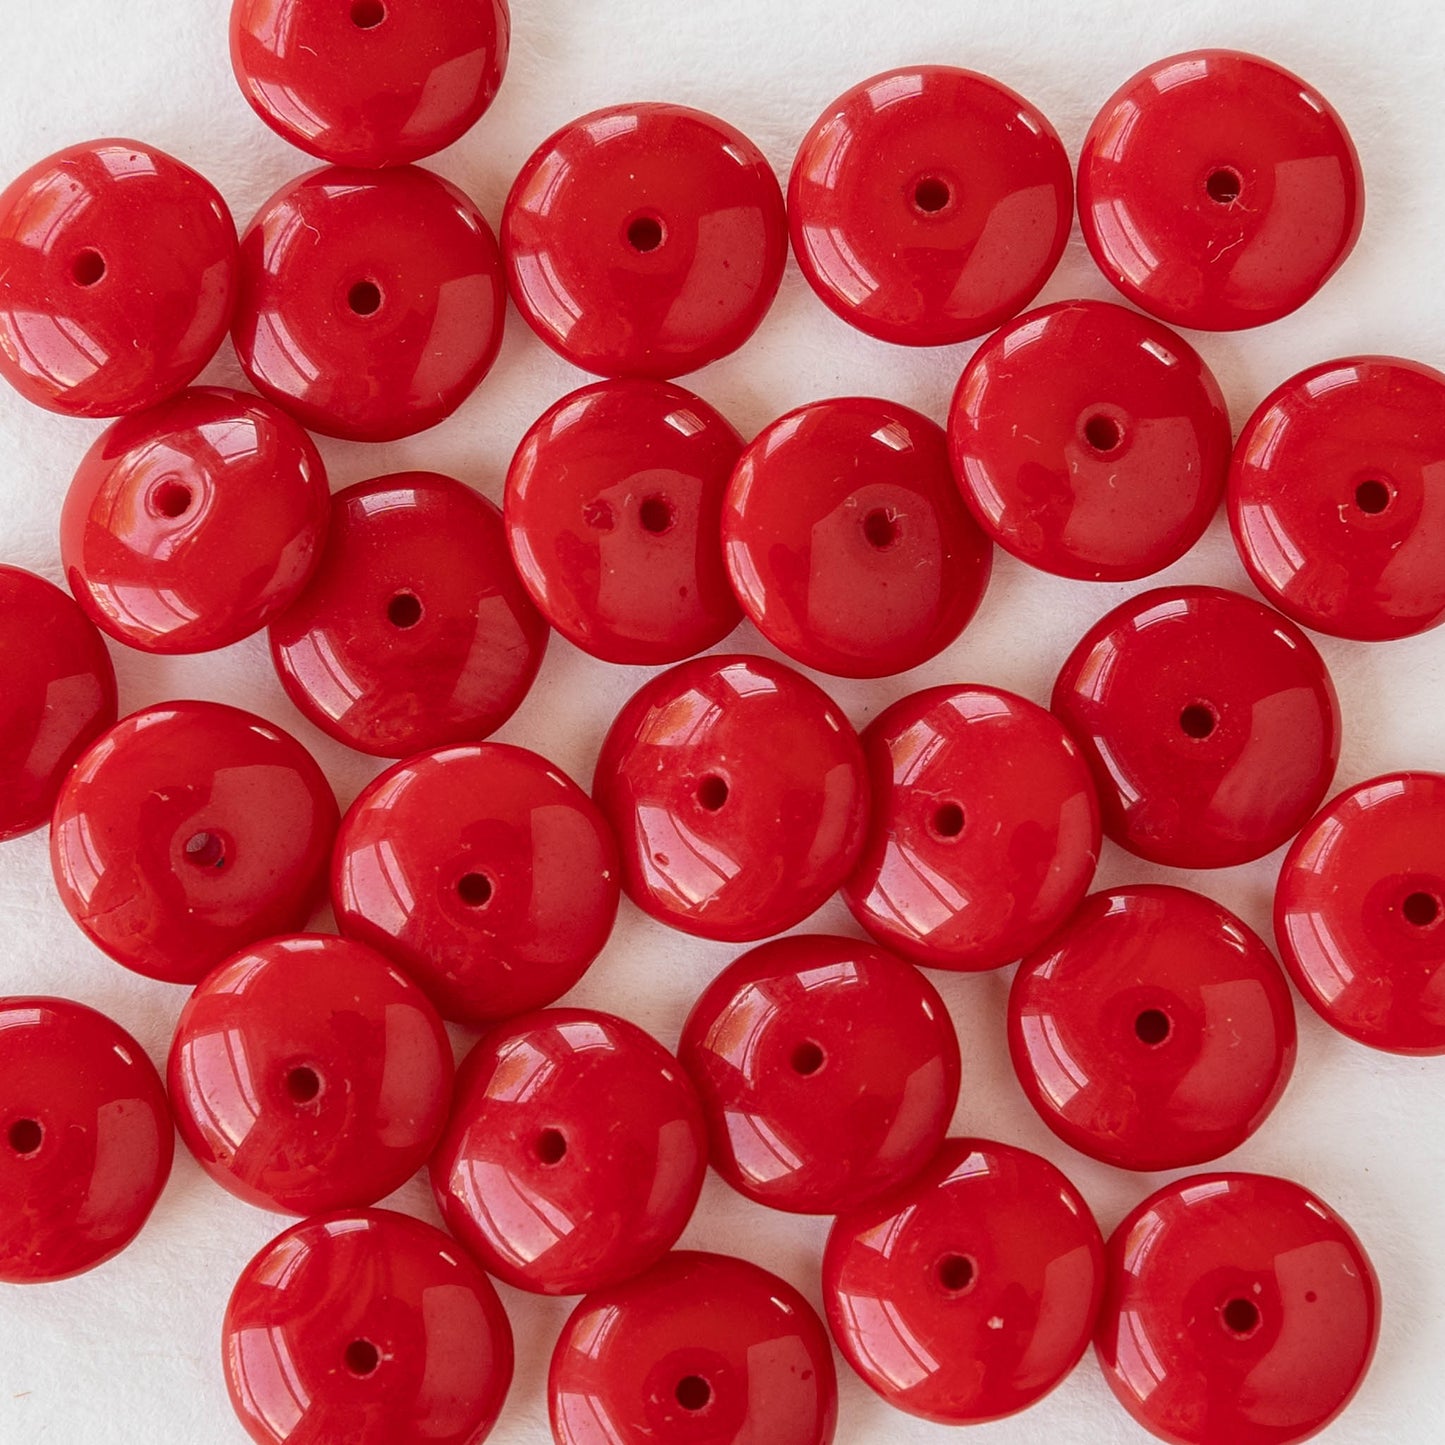 10mm Rondelle Beads - Opaque Red - 30 Beads